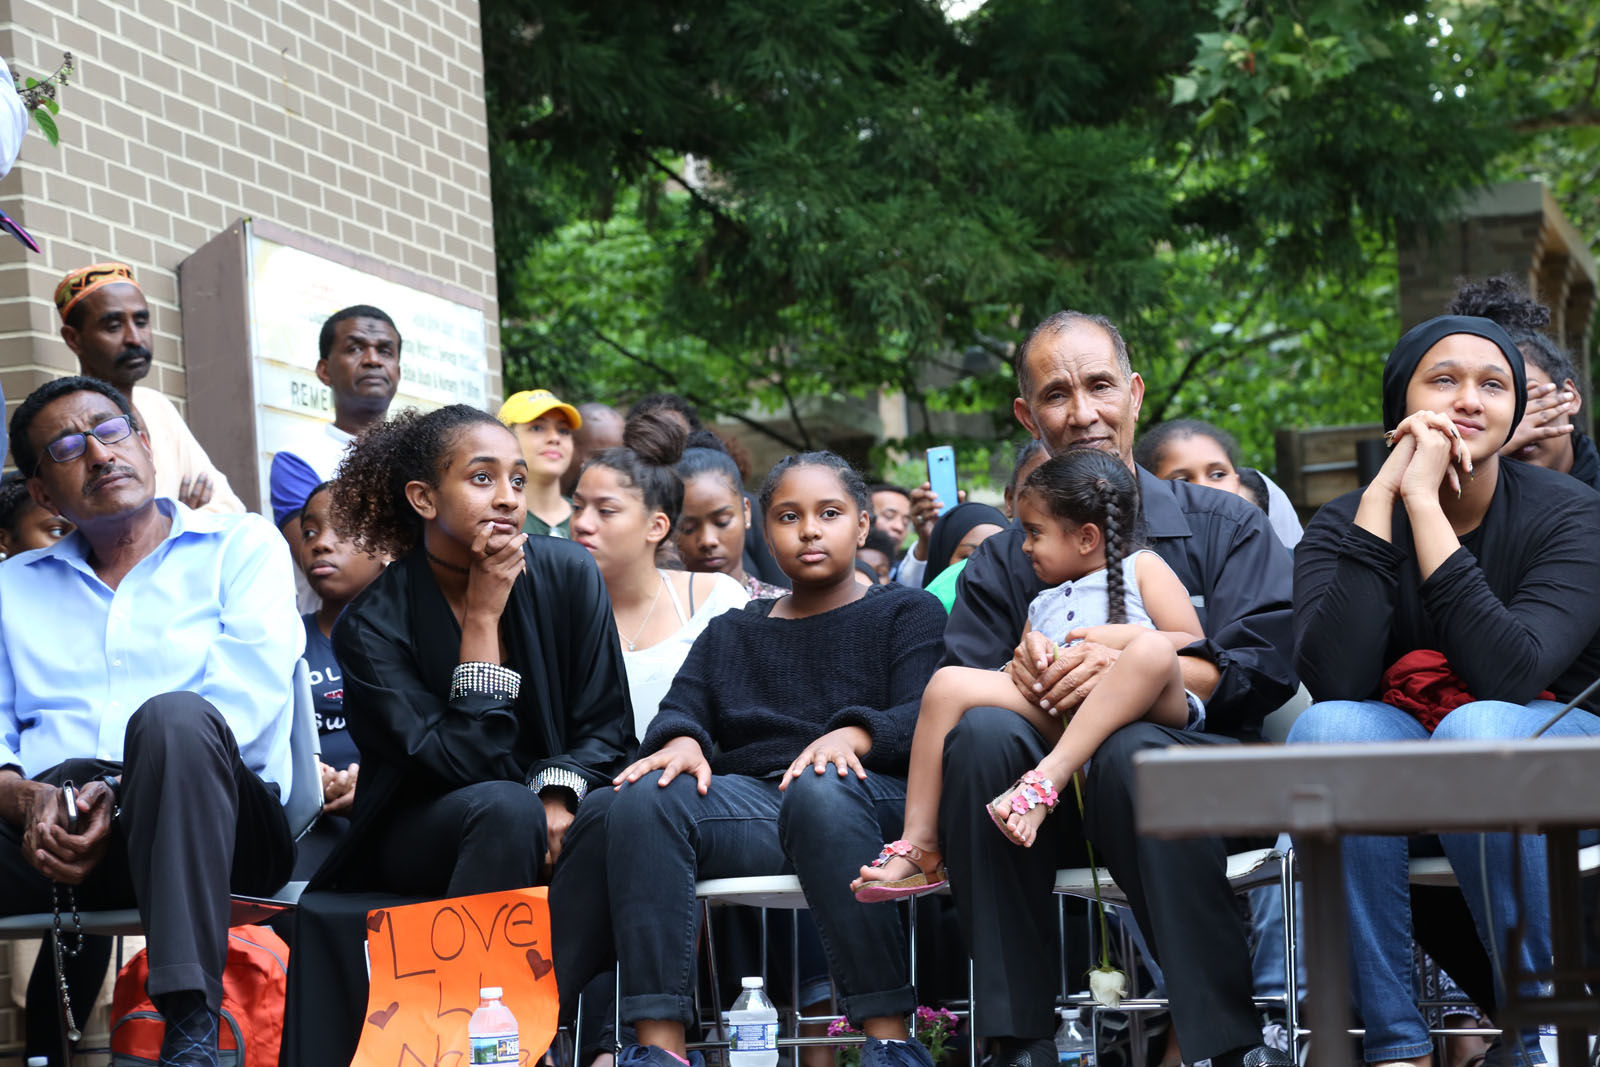 Nabra Hassanen's family looks on at a vigil in honor of Nabra on Wednesday, June 21, 2017, in Reston, Va.
 (WTOP/Omama Altaleb)